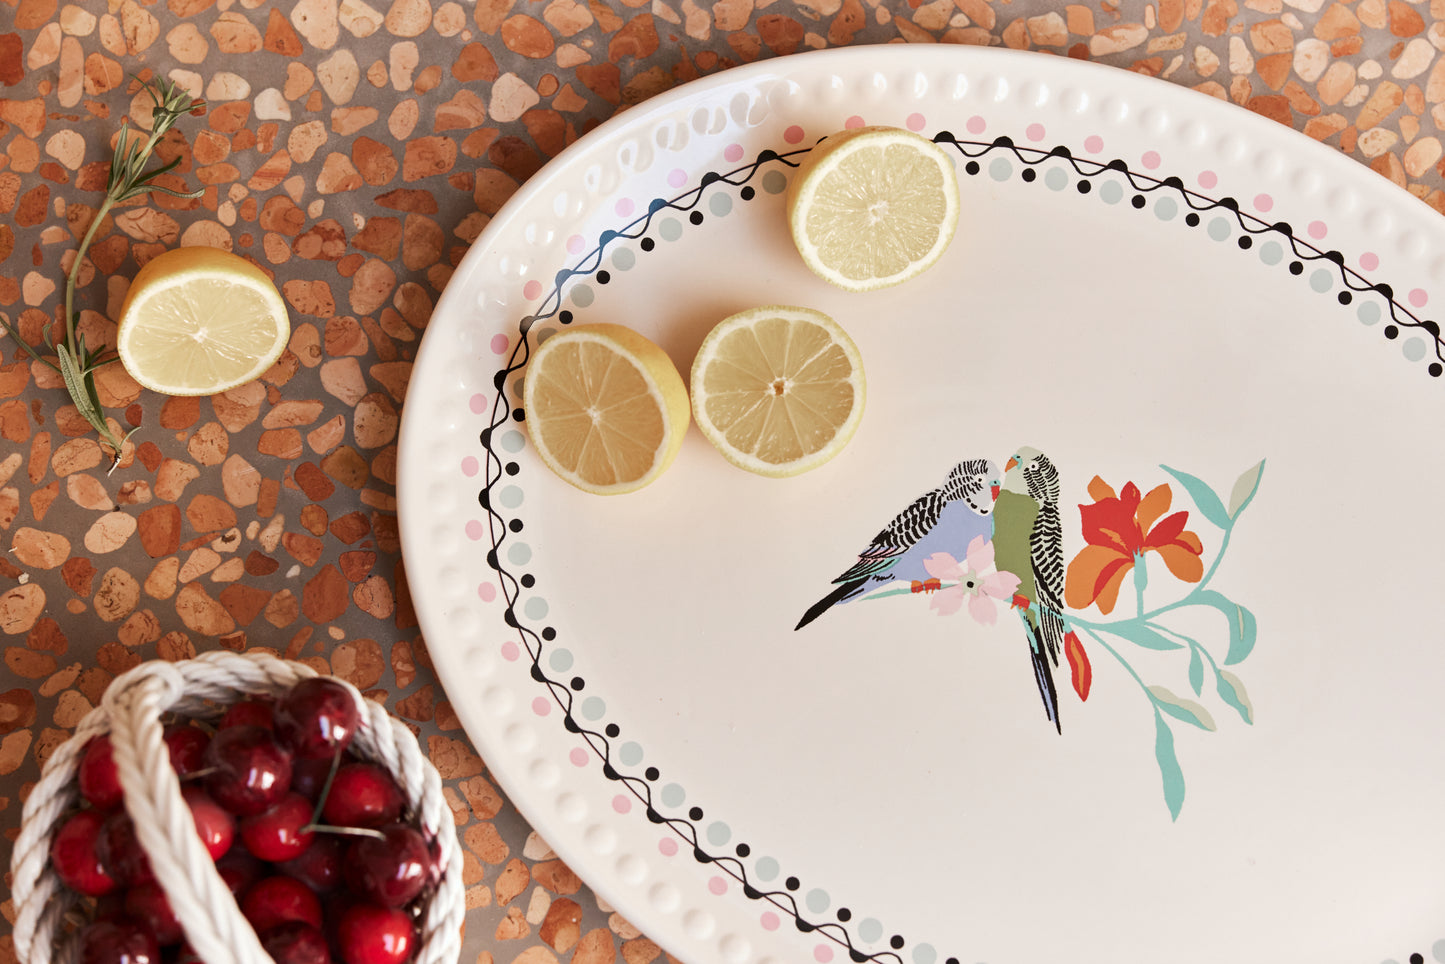 Cath Kidston Painted Table Ceramic Oval Serving Platter